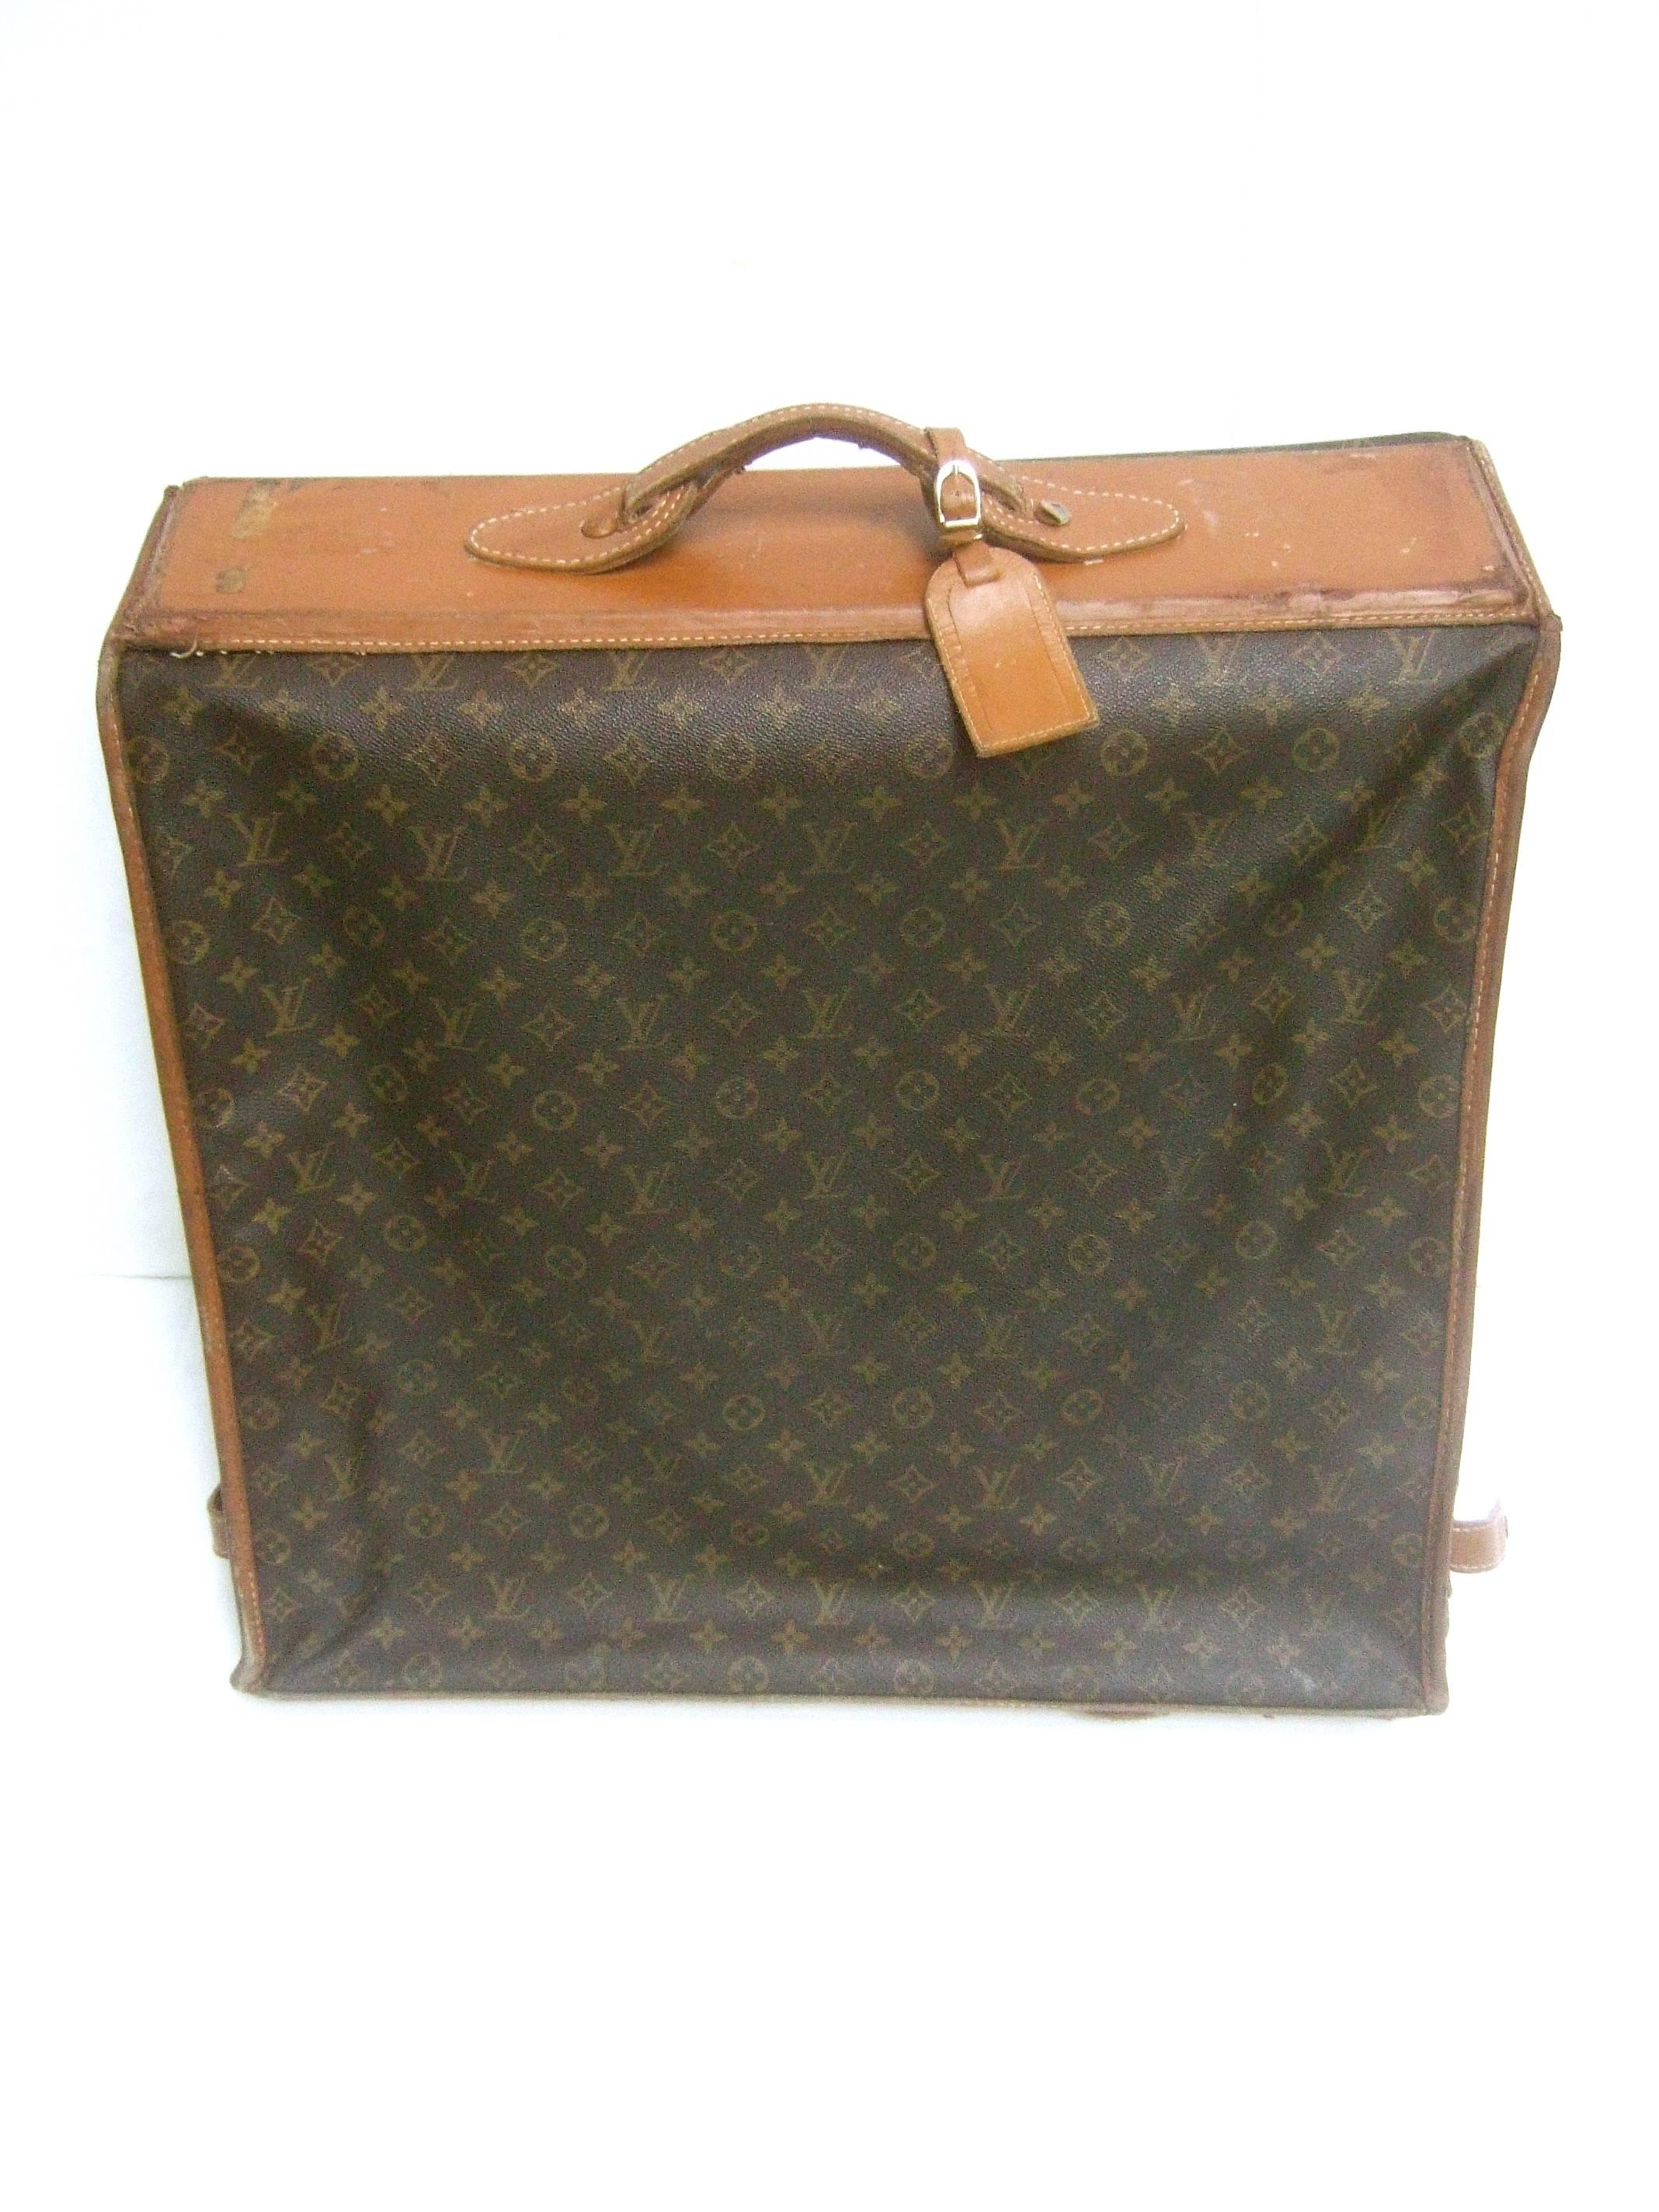 Louis Vuitton Shabby chic well loved garment travel case c 1970s
The stylish retro travel luggage is designed with 
Louis Vuitton's signature brown coated canvas 
covering with L.V. initials repeated throughout  

The top handle section and base are